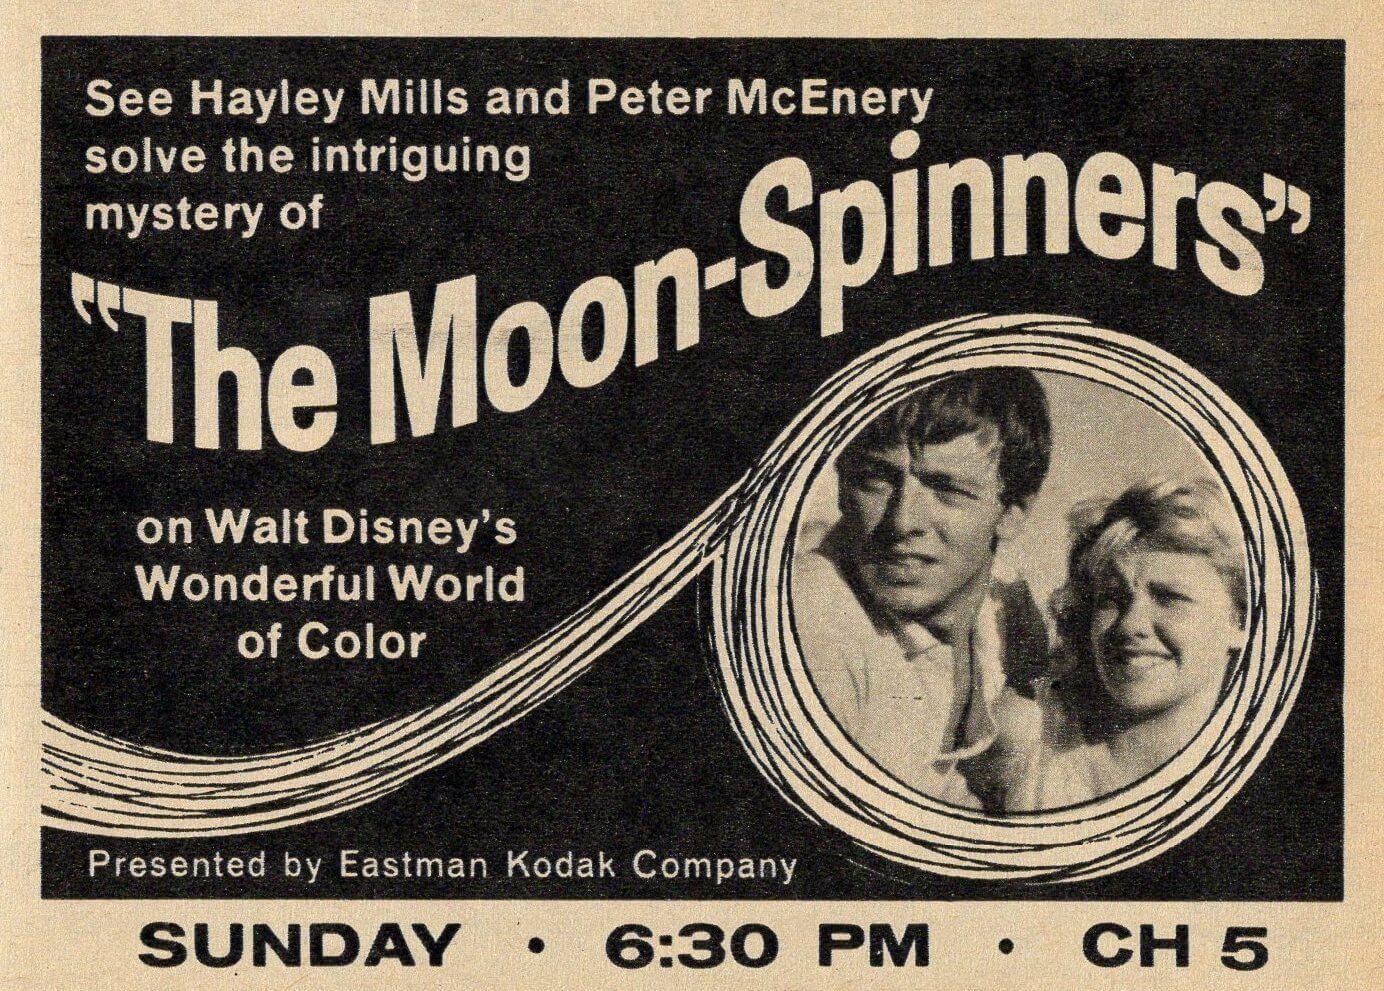 The Moon Spinners - CFF